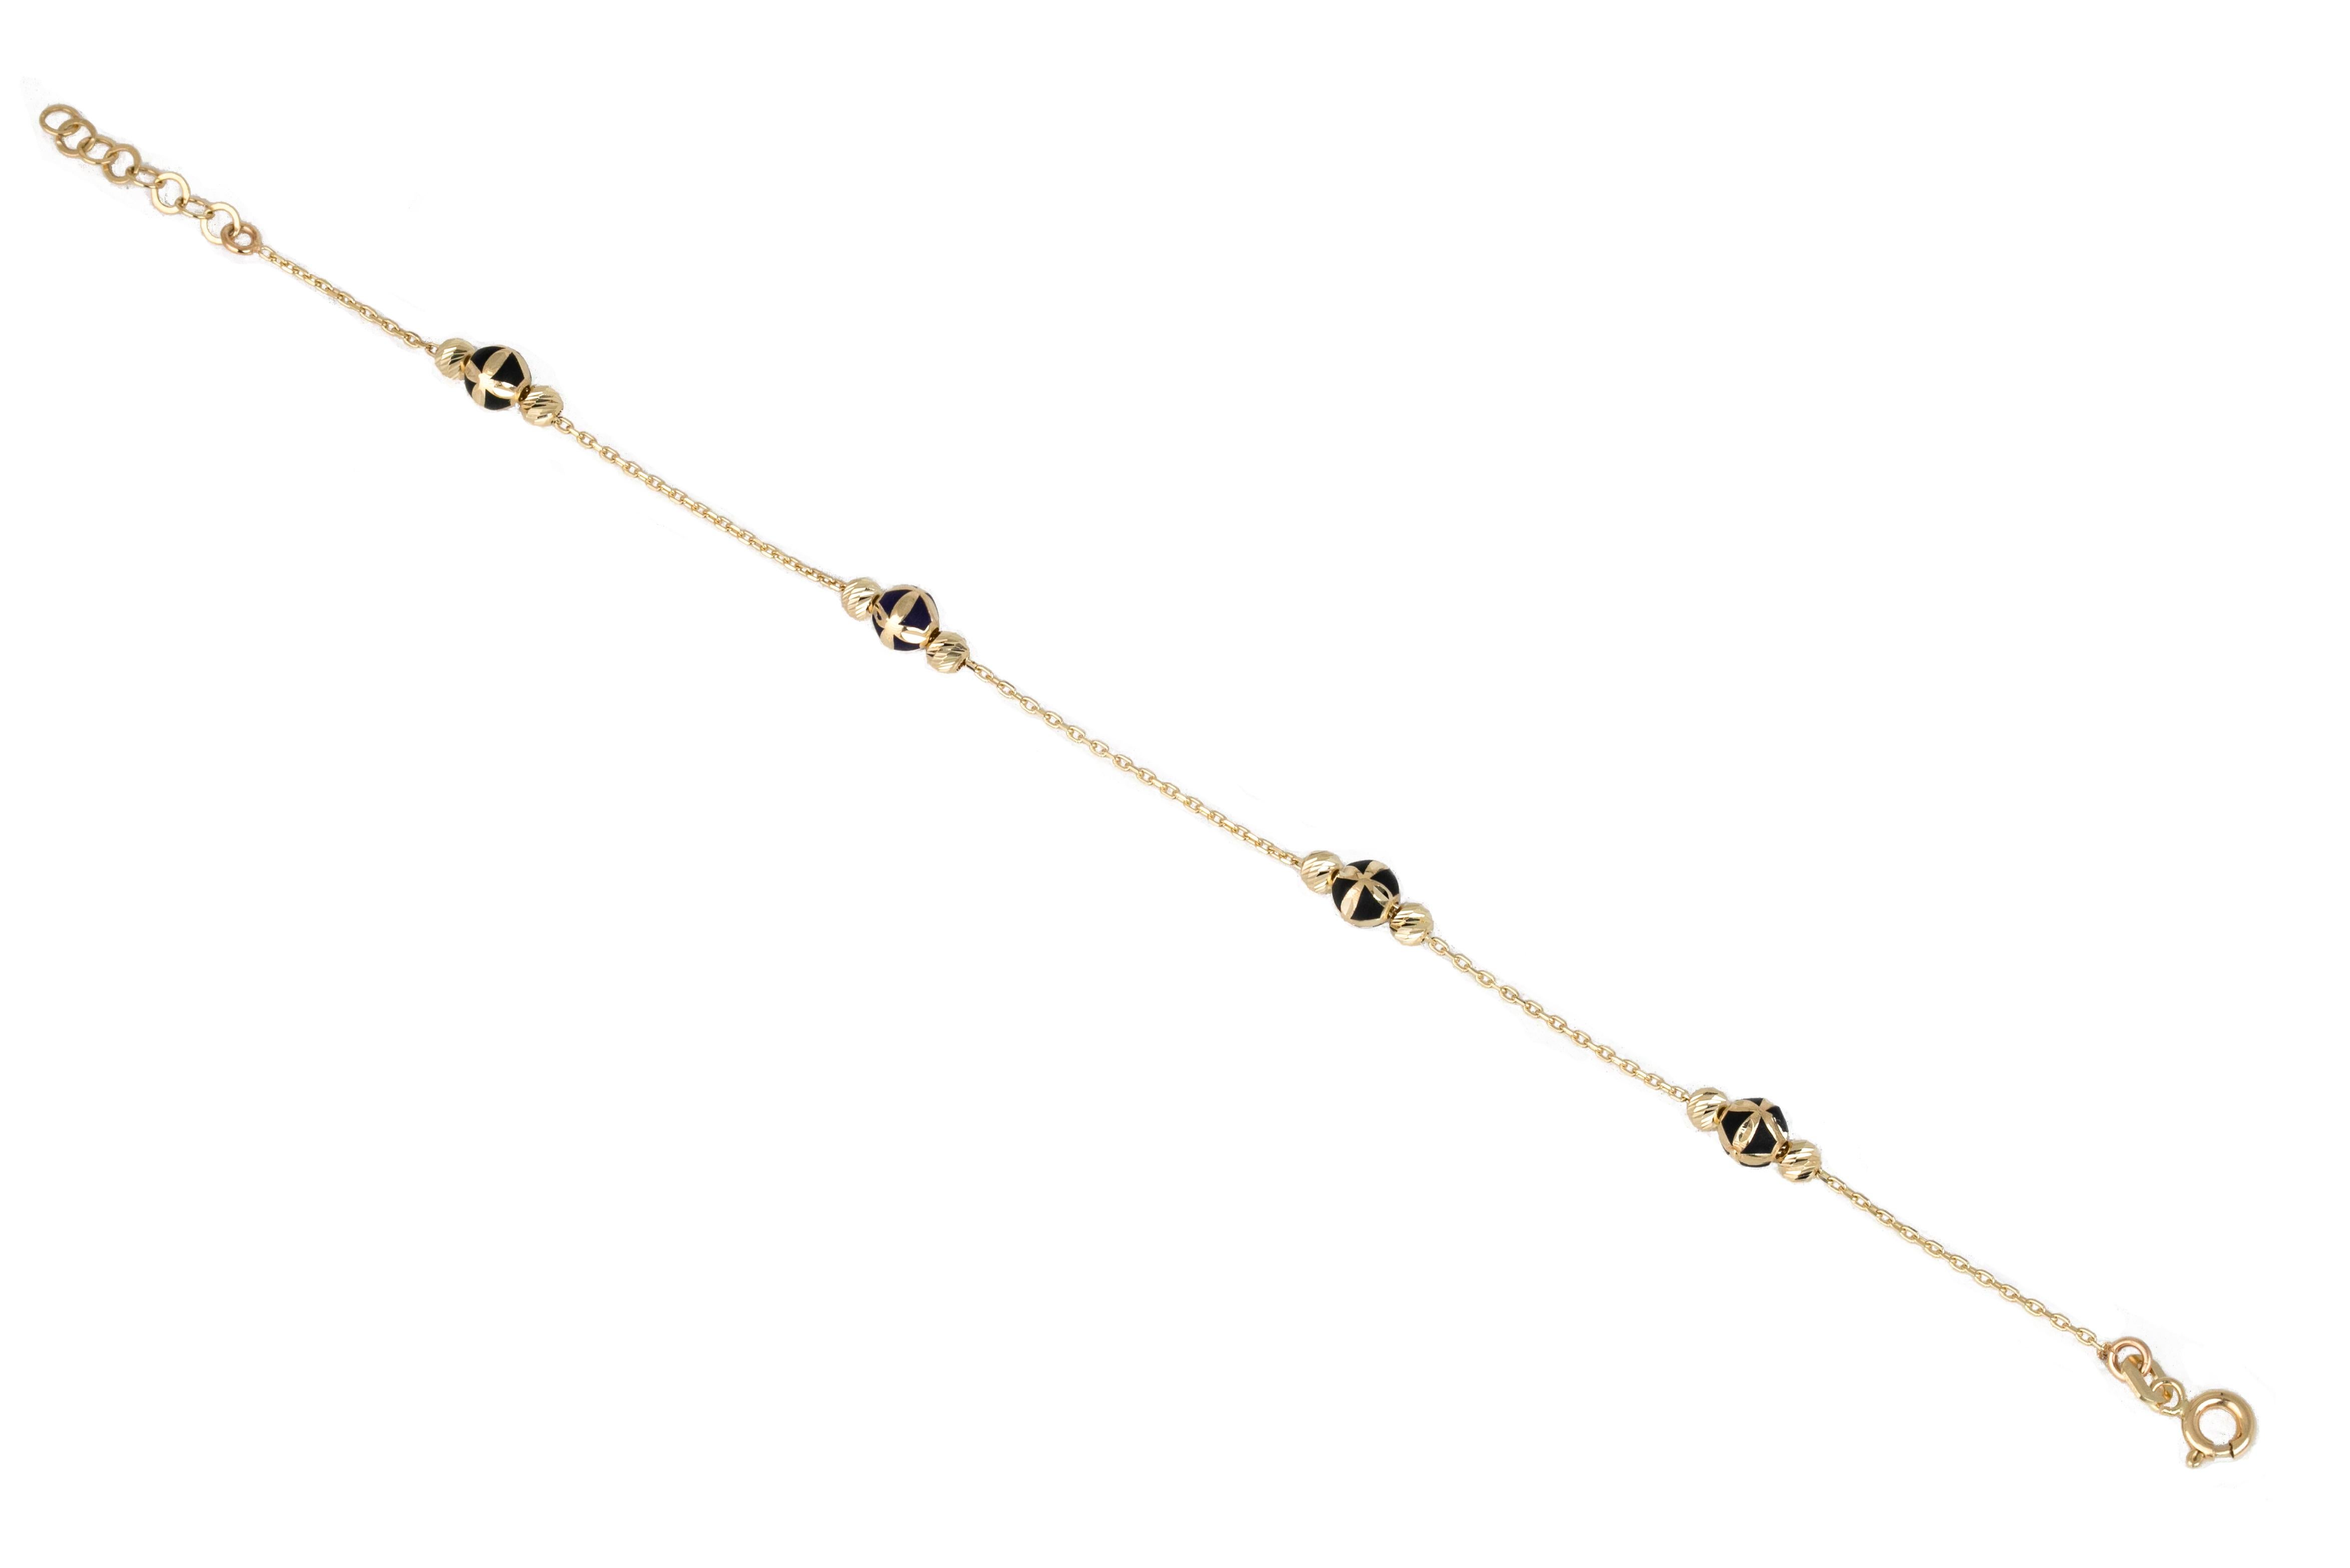 14K Gold Bracelet Black Enameled and Dorica Collected Model Bracelet

Solid gold.
With hallmark.

Total Weight: 2,04 gr.
Size: 19.00 cm

*It is produced by placing two Dorica Balls on a forse chain and a large ball with Black Enamel and a pattern in